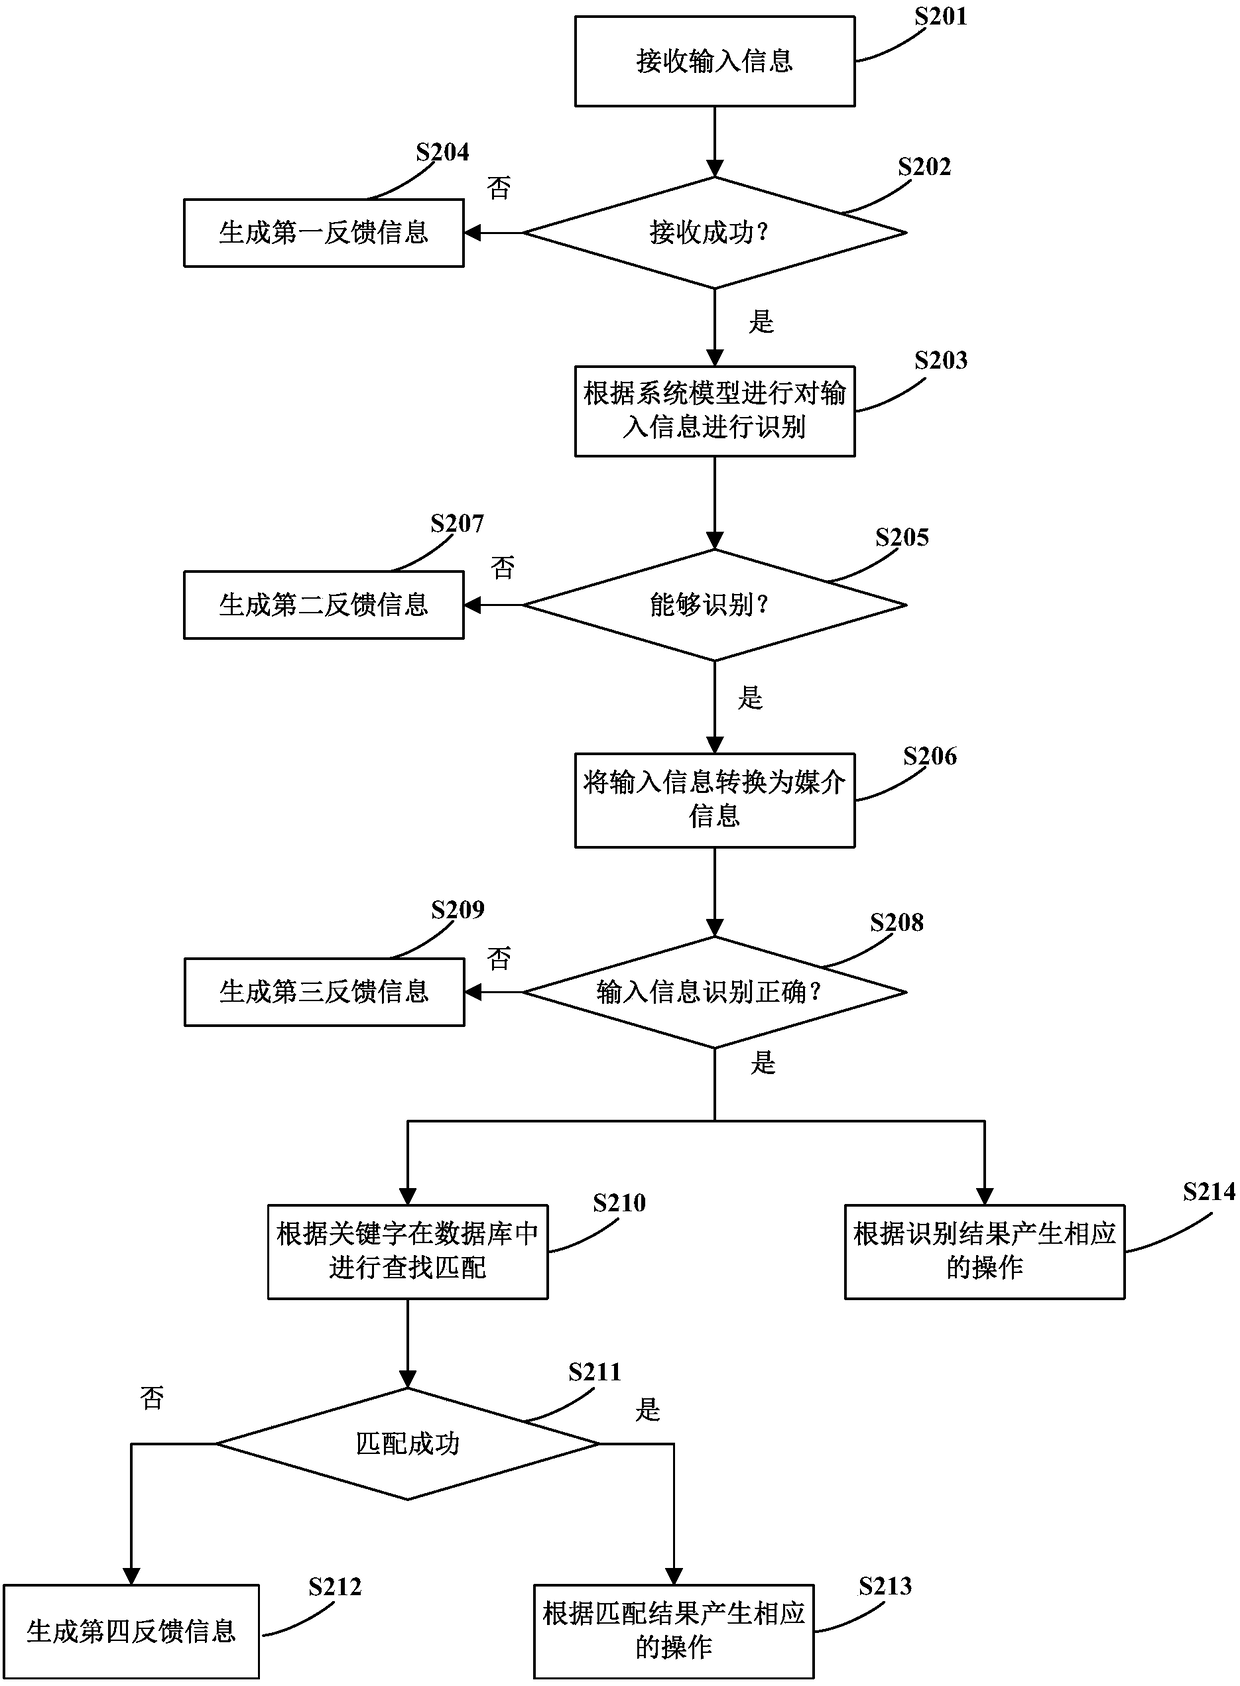 Information processing method and device used for data visualization